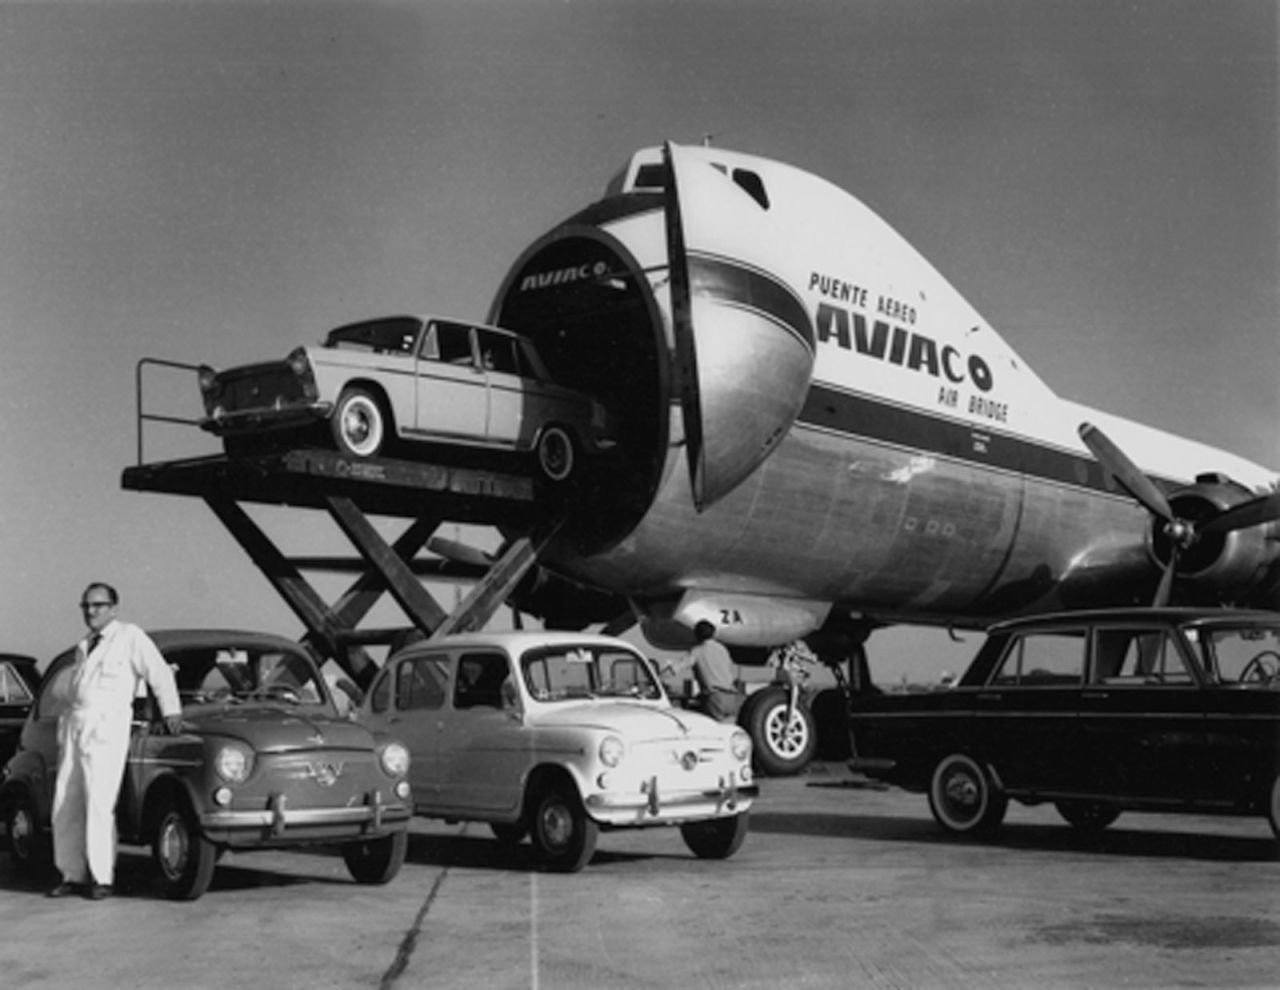 To load Carvair planes, vehicles would be elevated to cabin level with a scissors-type lift and loaded through the front door.